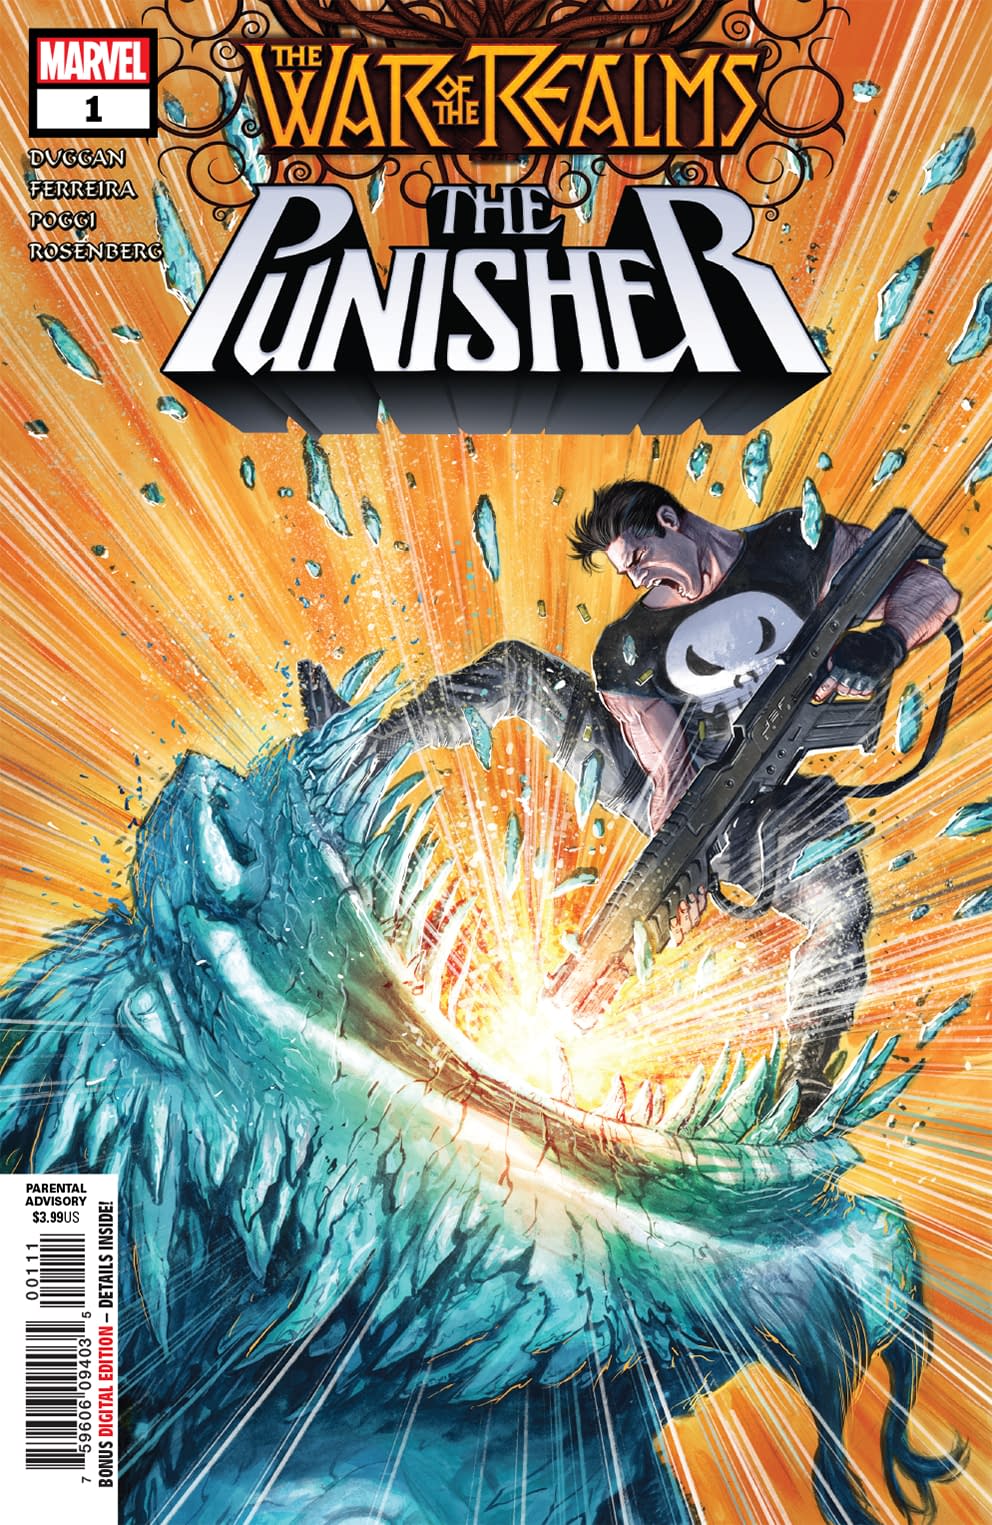 Will the Punisher Punish Recreational Marijuana Users in War of the Realms? (Preview)